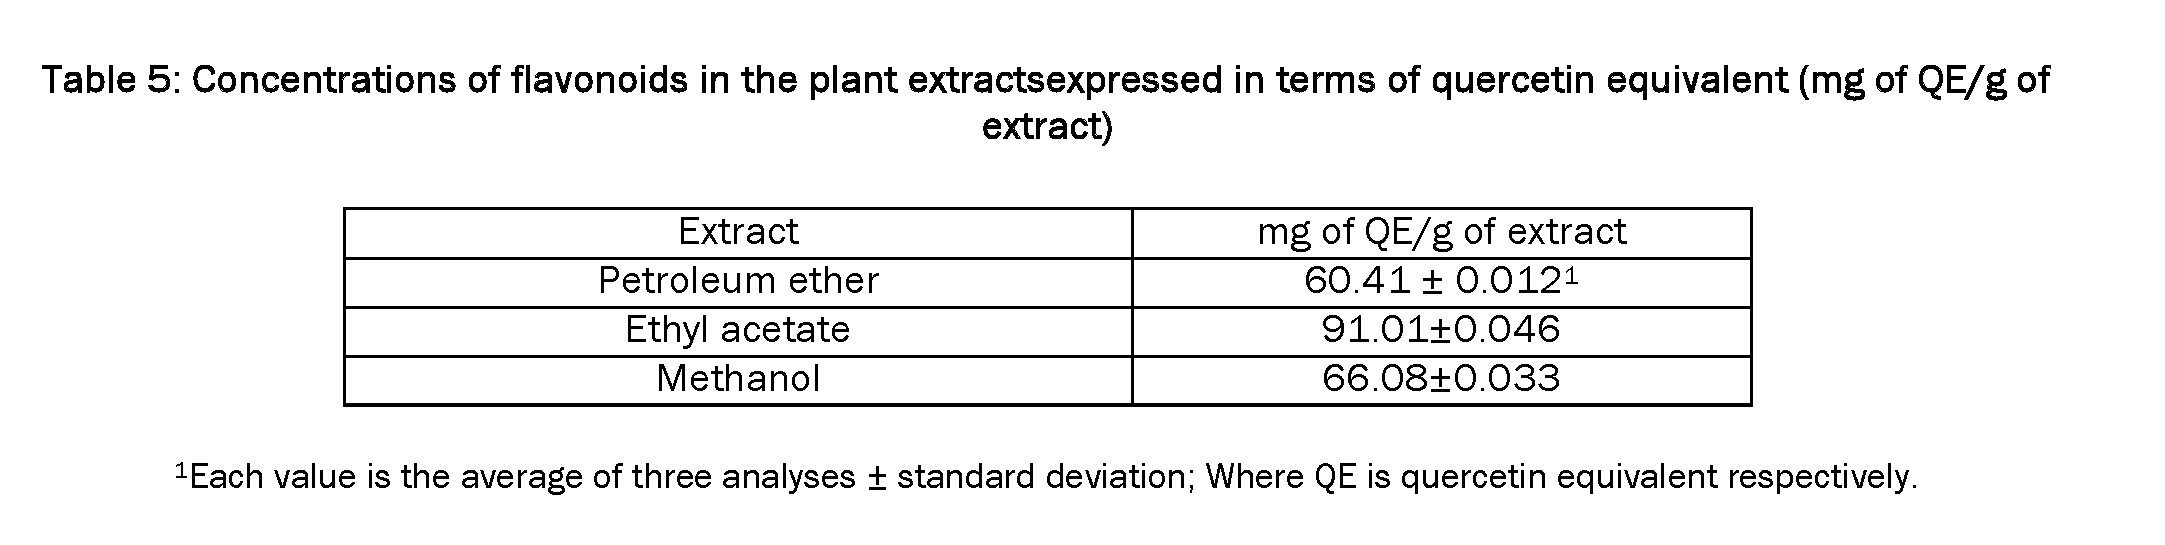 Pharmacognsoy-Phytochemistry-Concentrations-flavonoids-in-the-plant-extracts-expressed